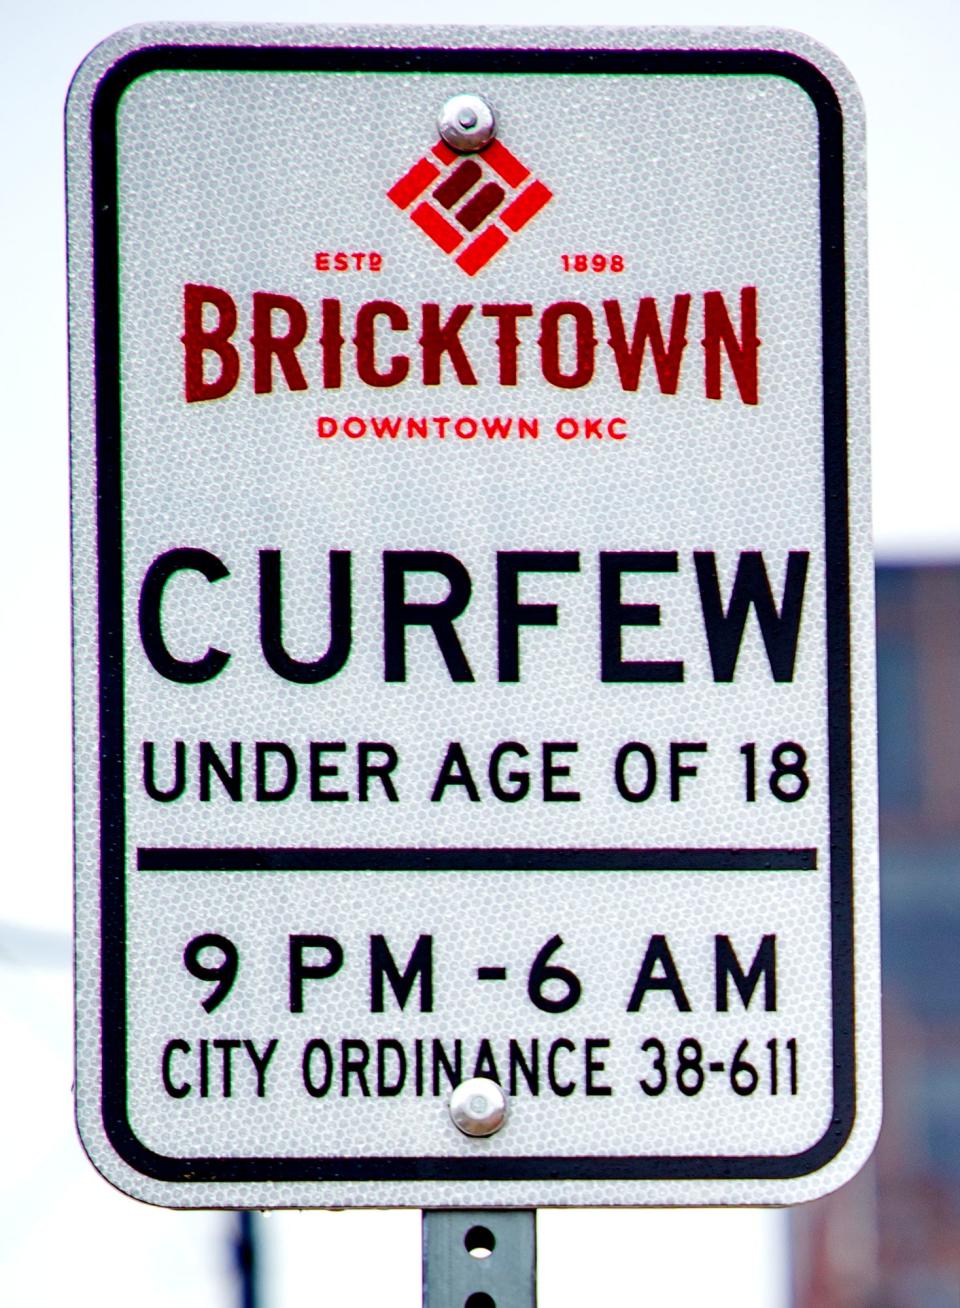 A Bricktown curfew sign is pictured March 9 in Oklahoma City.